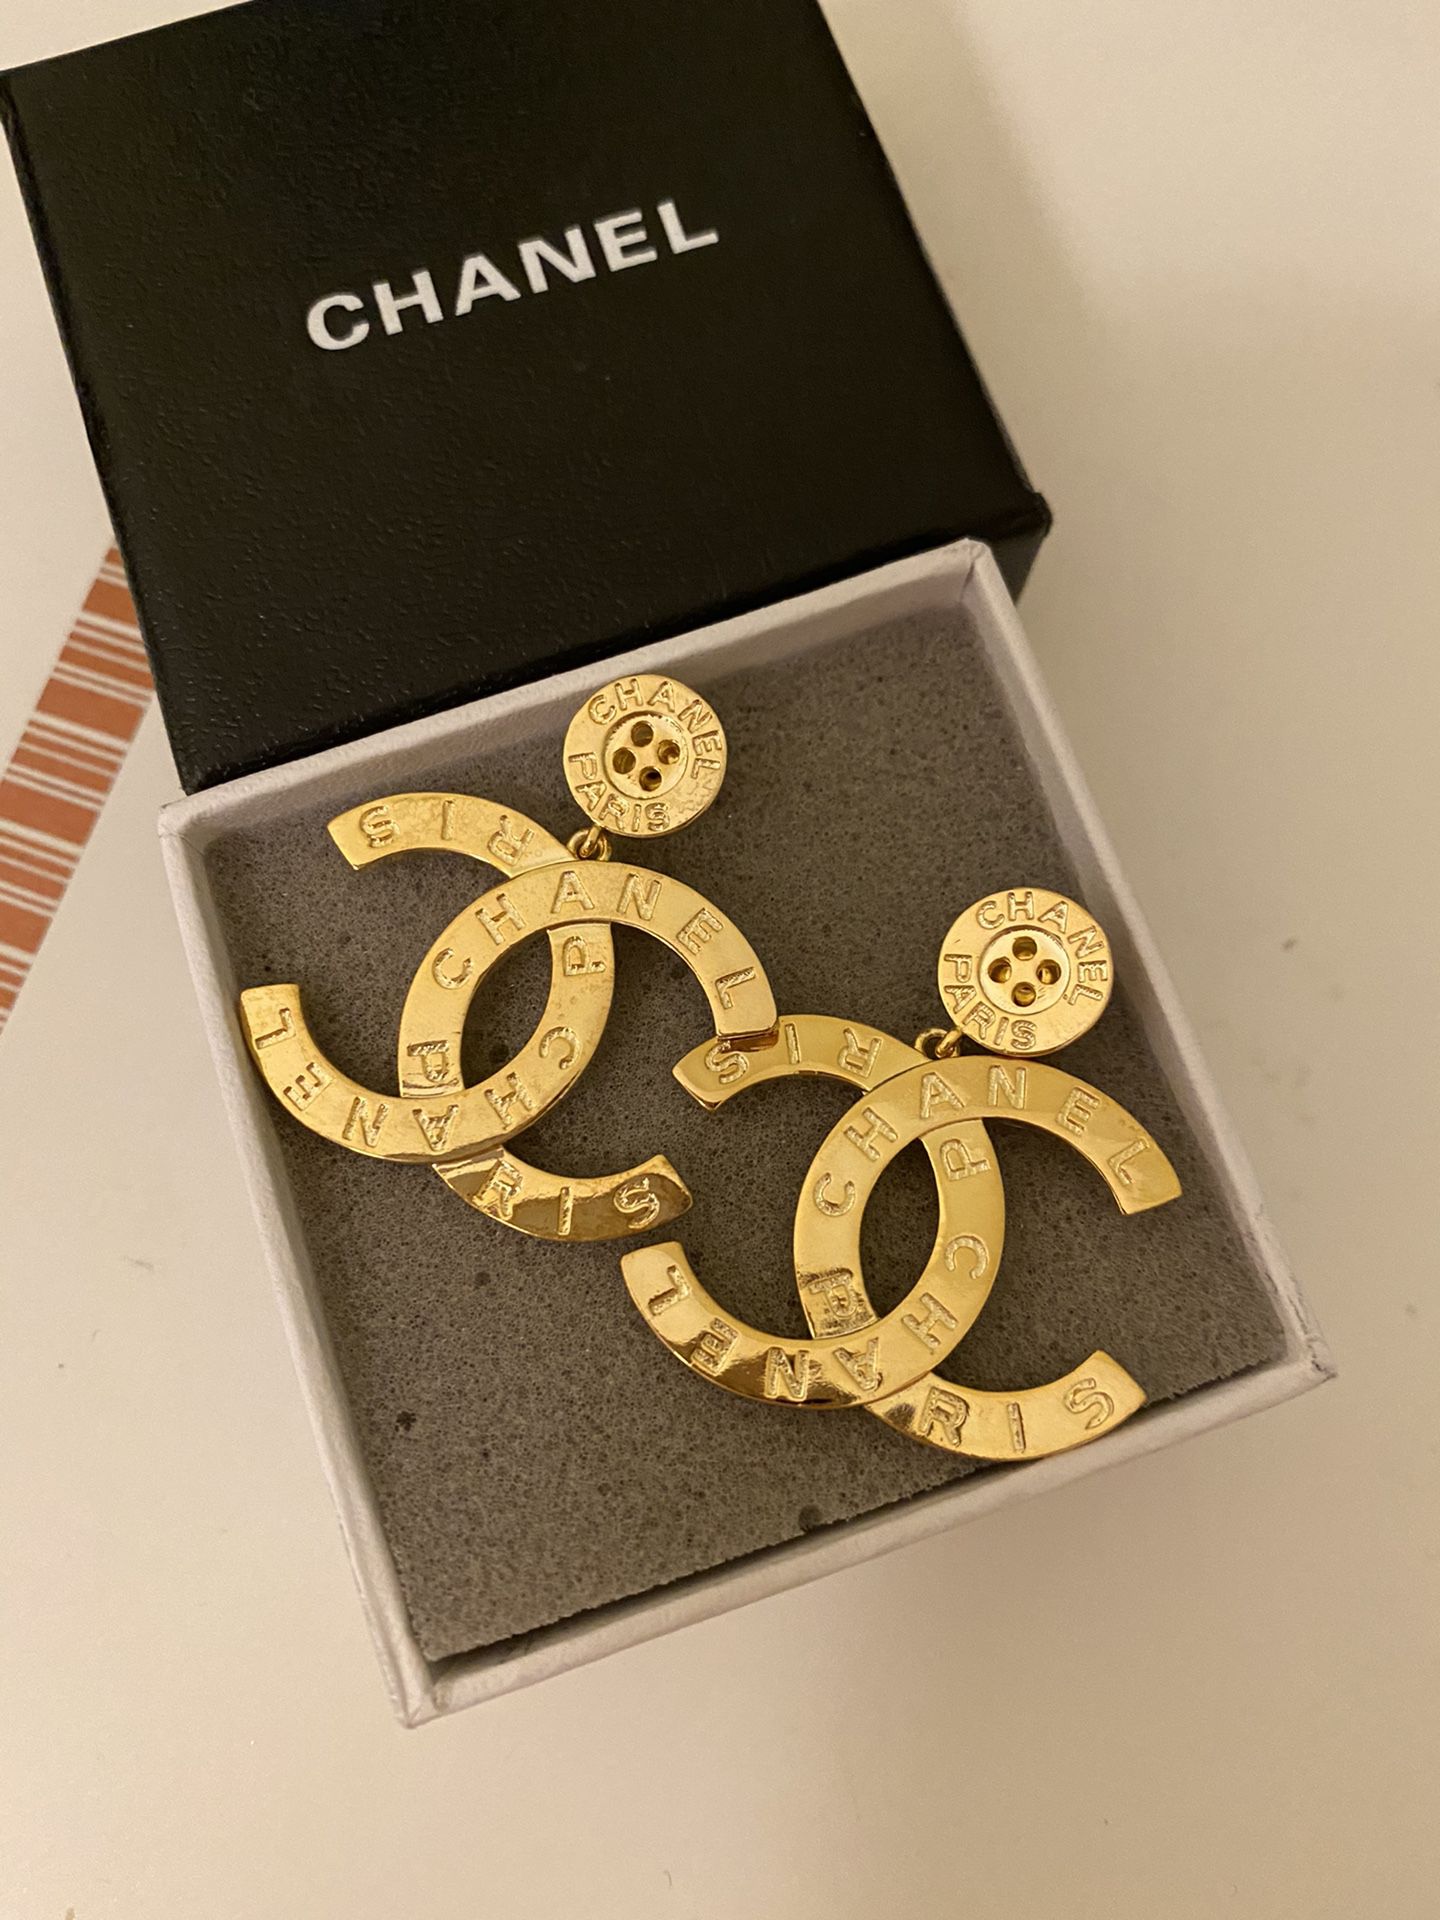 Lv, Chanel Gucci Earrings for Sale in Washington, DC - OfferUp